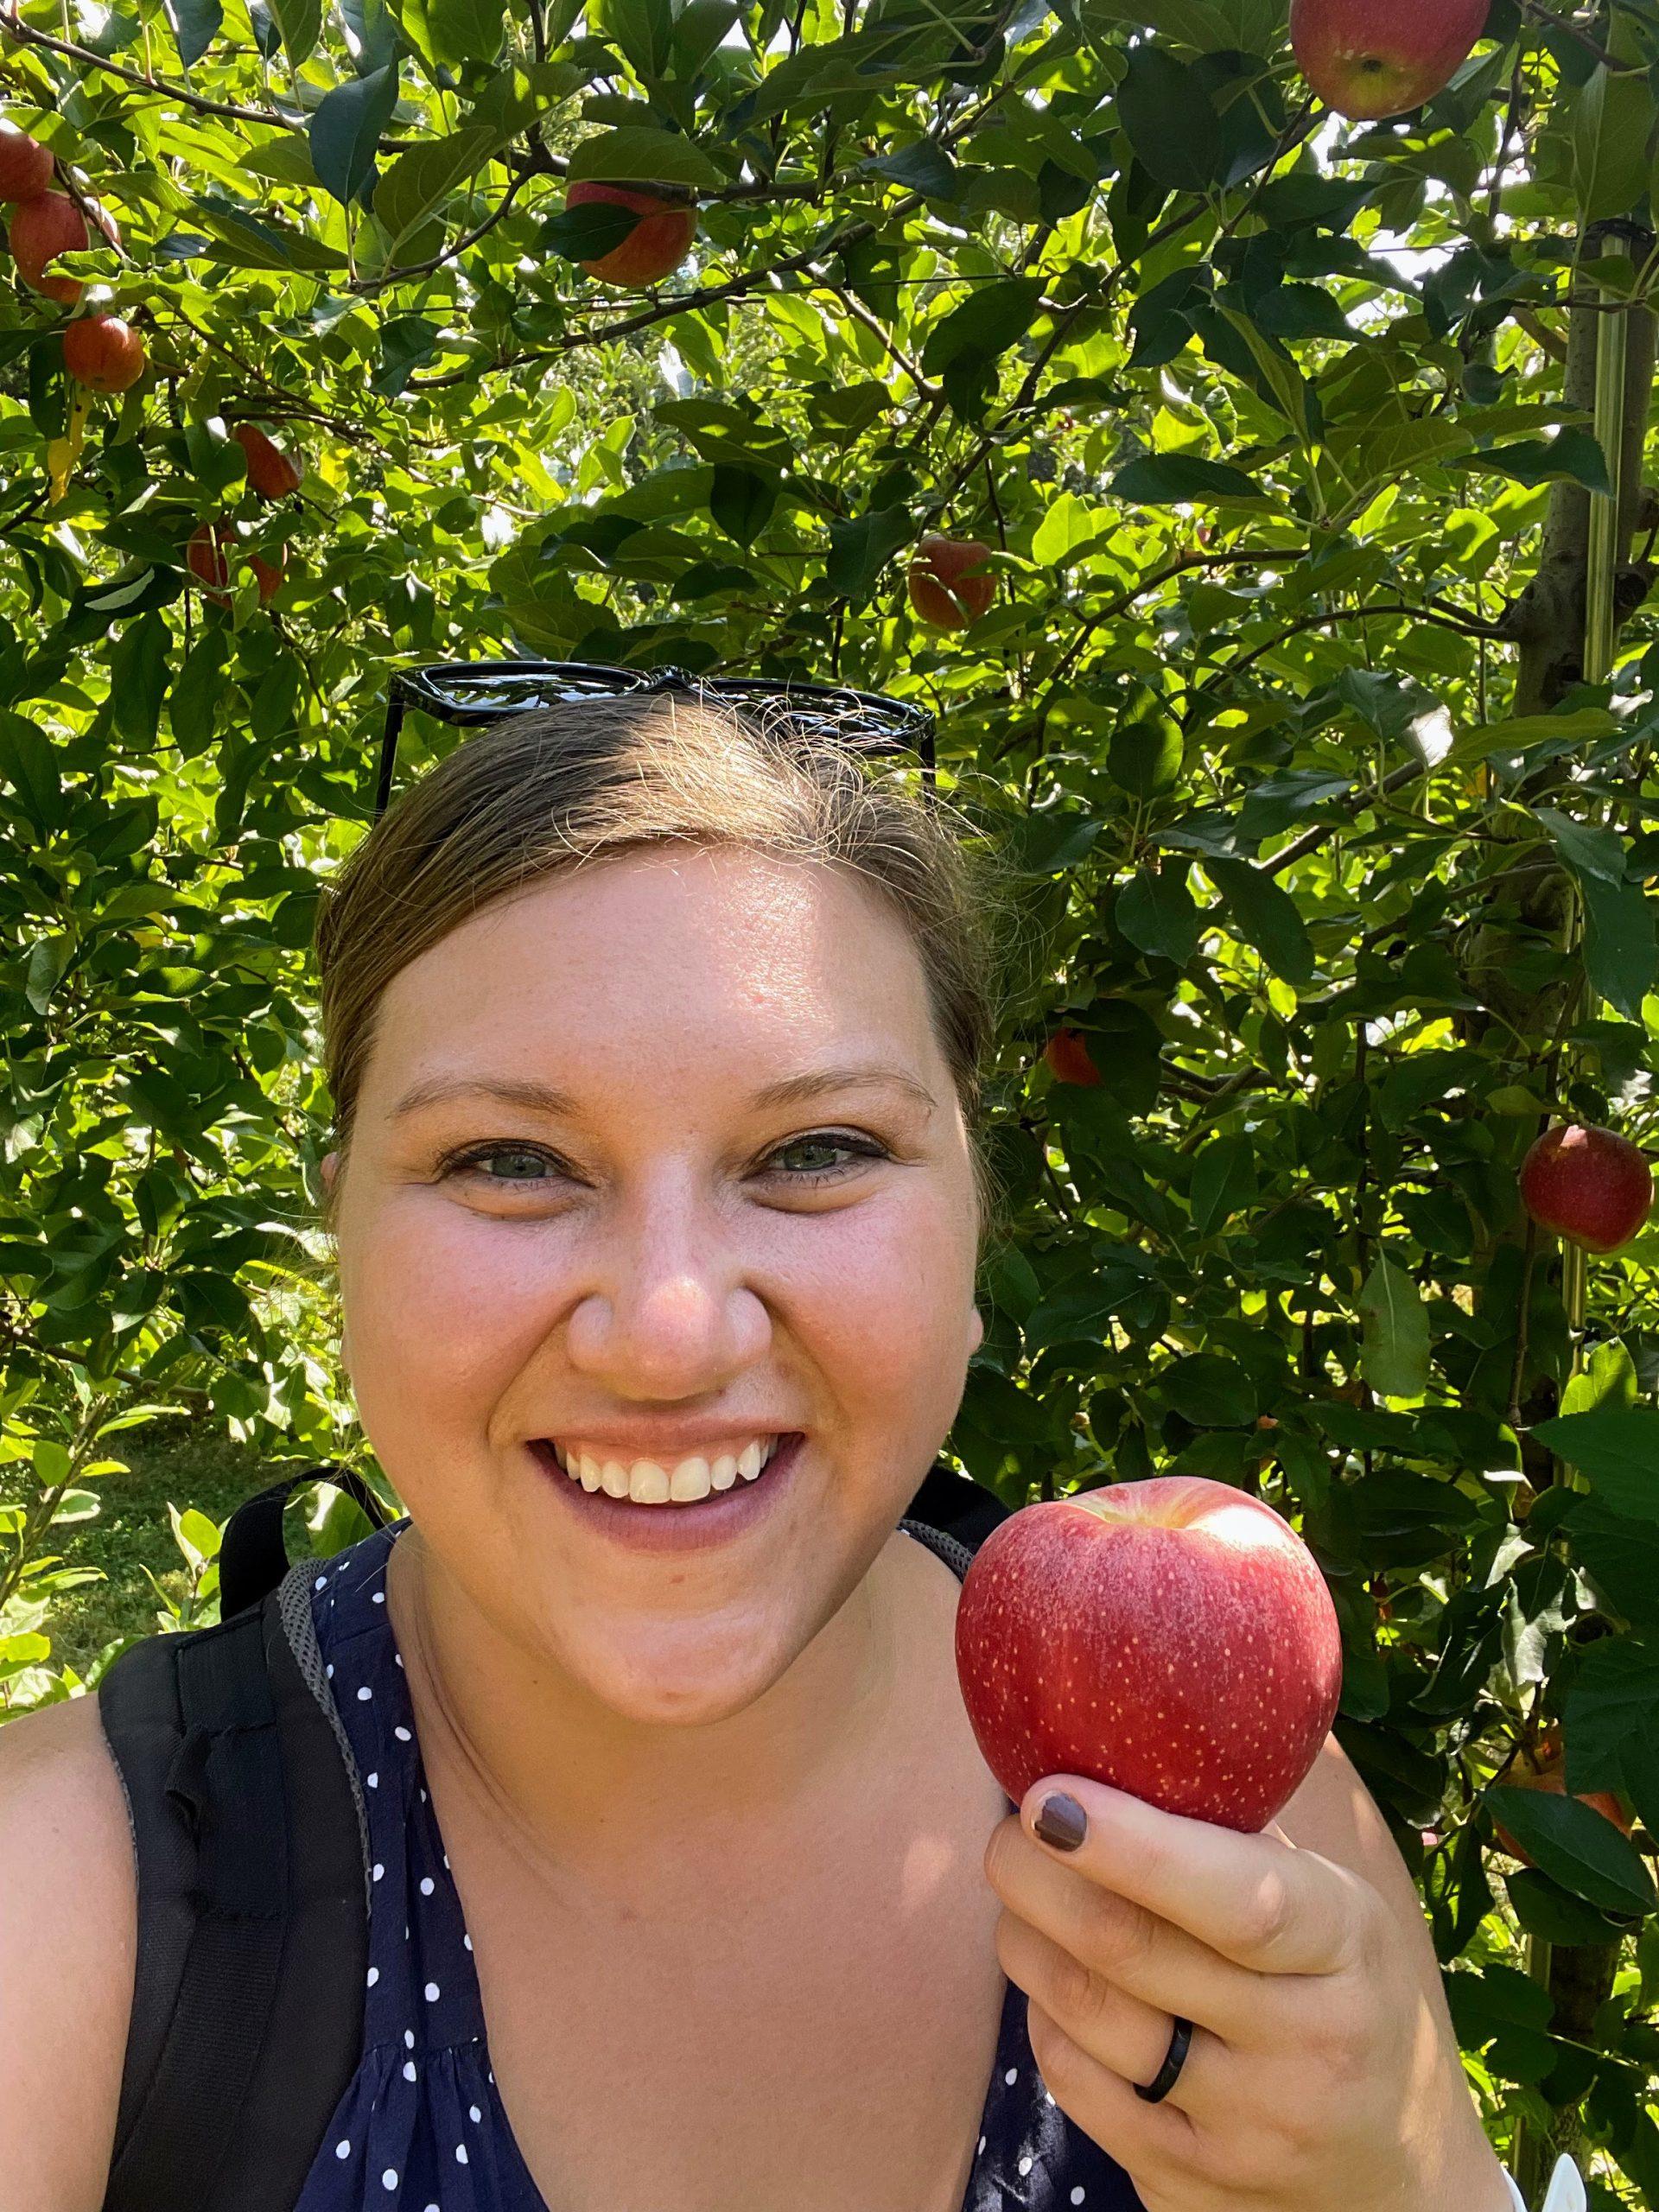 A woman is smiling and standing in an apple orchard holds one red apple in her hand